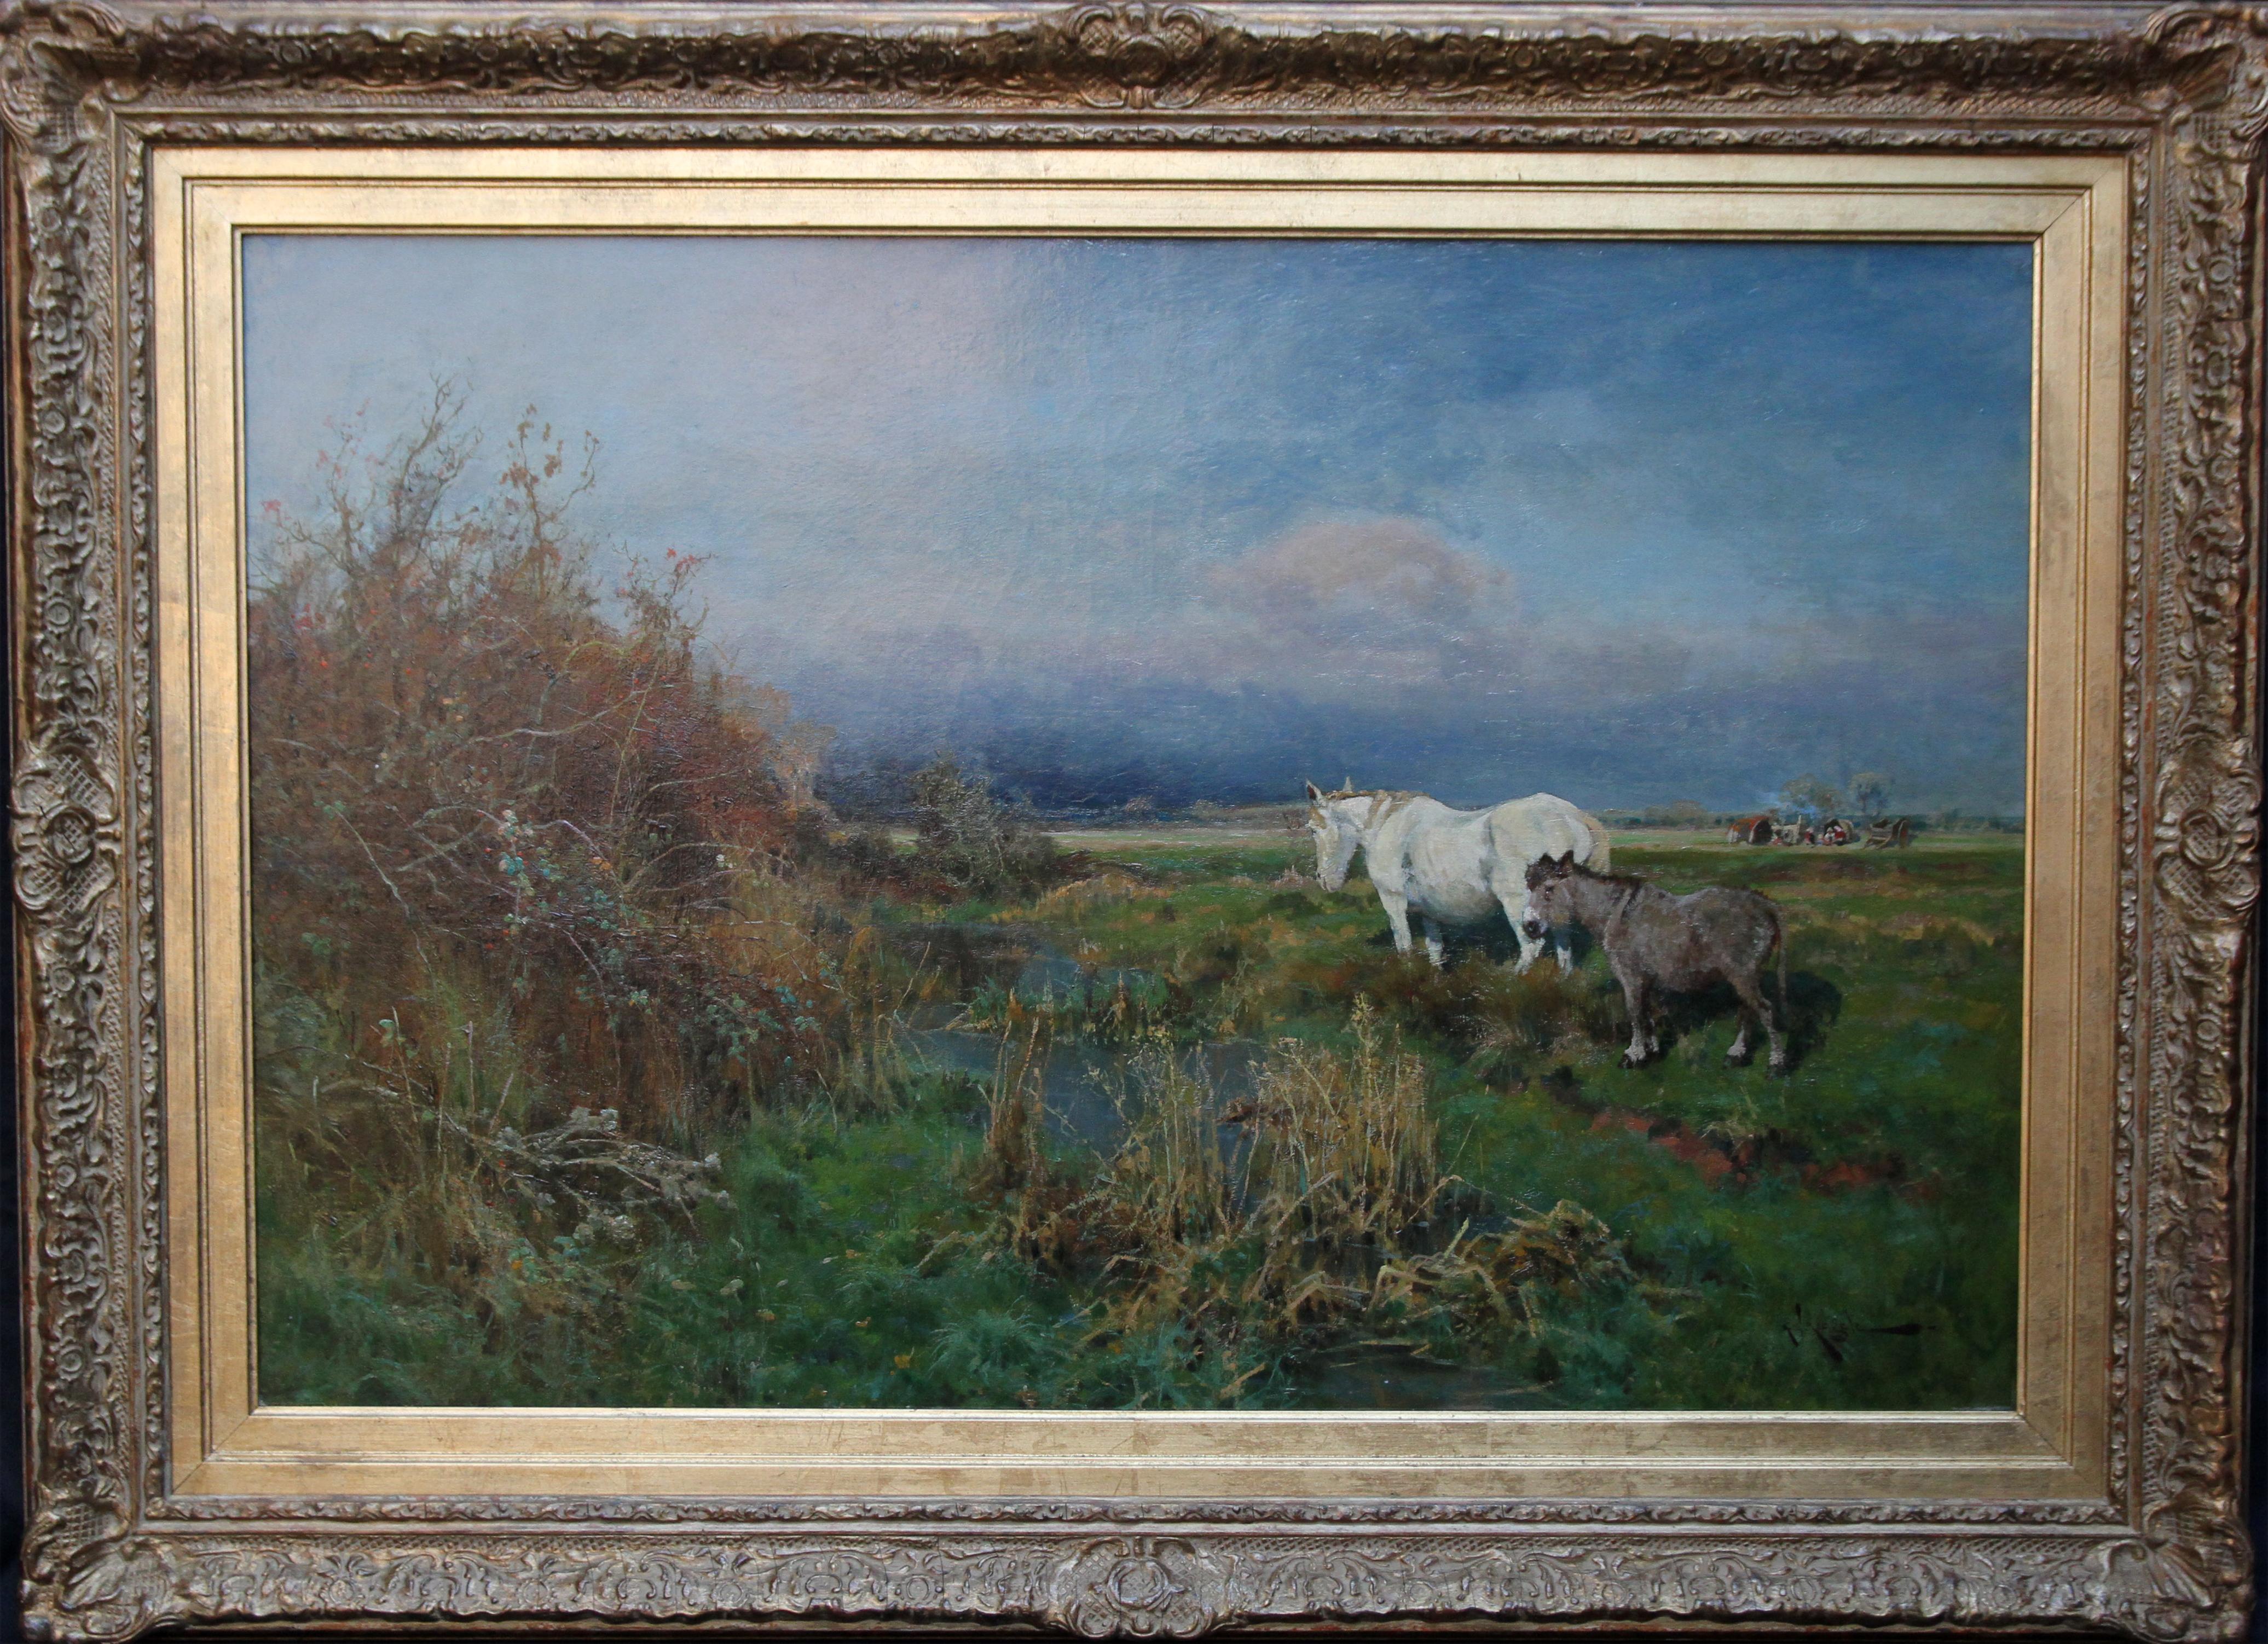 Nottingham Landscape with horse - British 1900 animal oil painting equine art For Sale 6